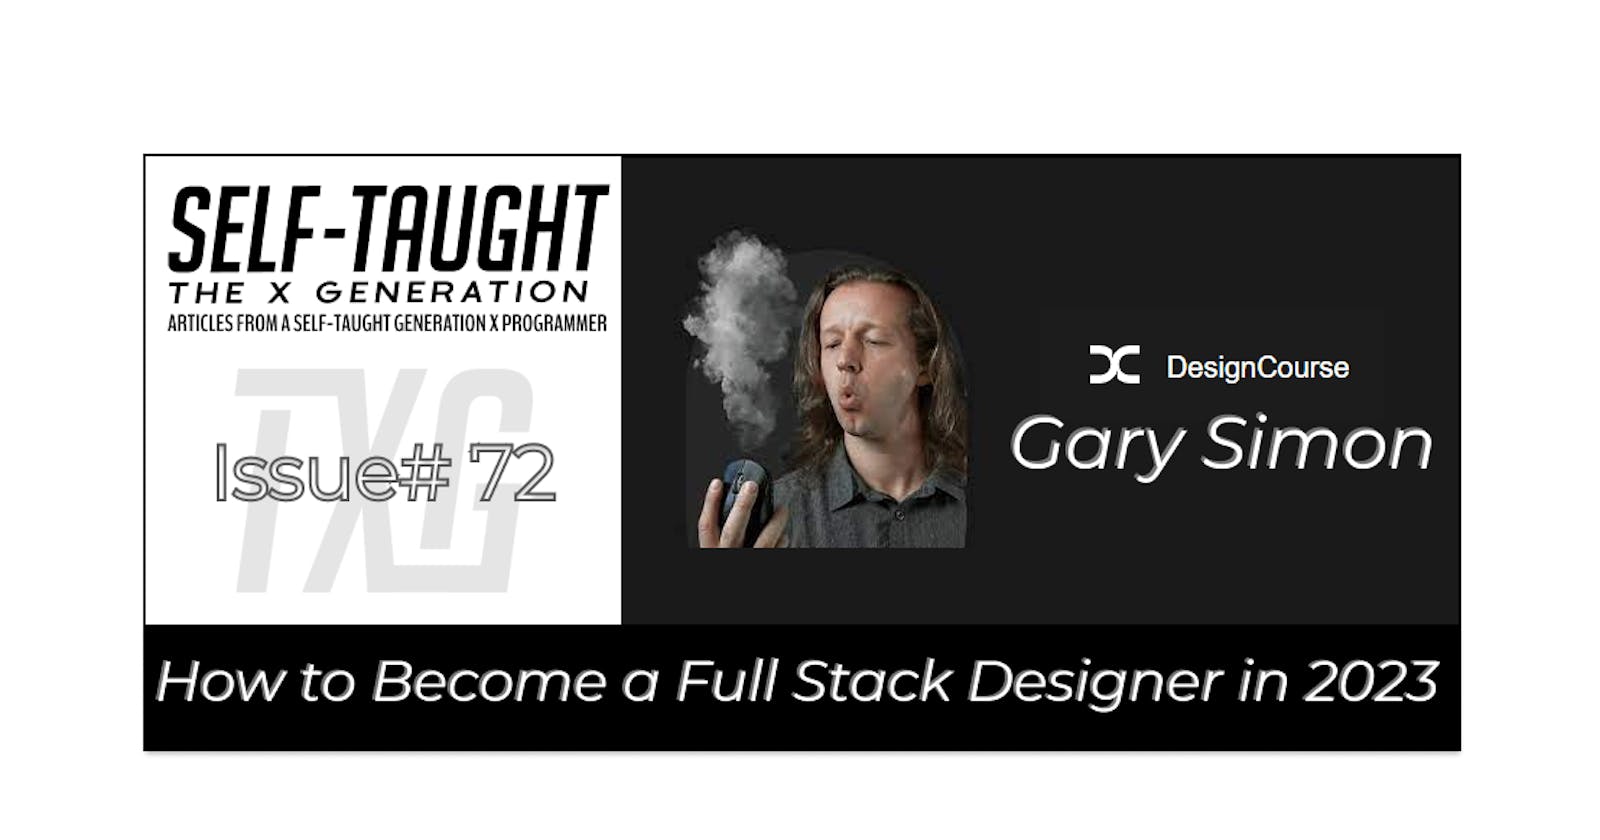 How to Become a Full Stack Designer in 2023